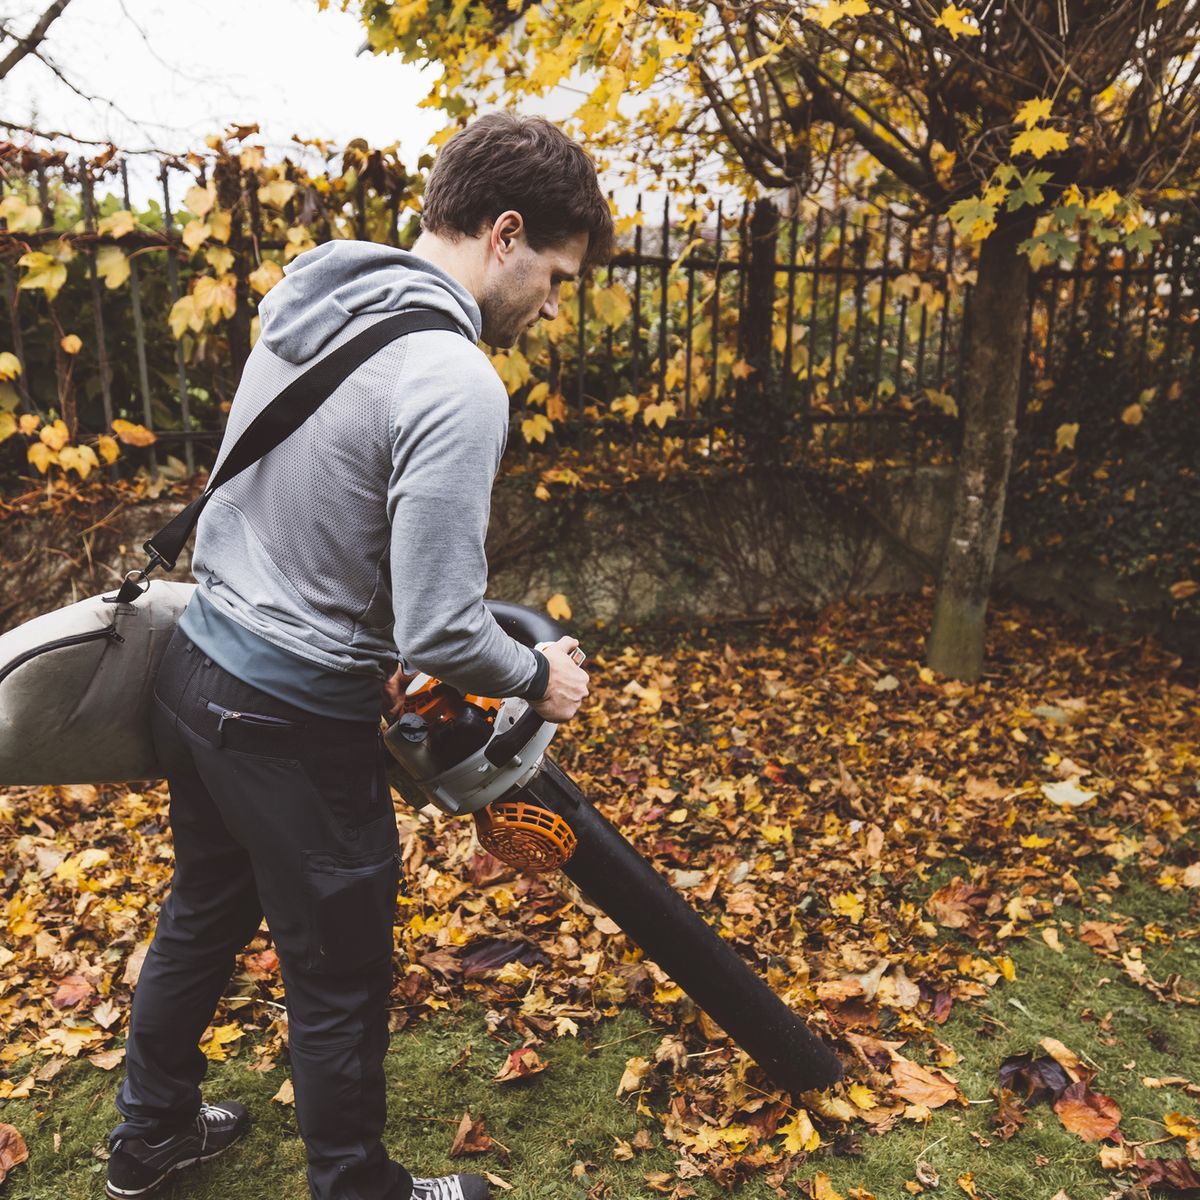 https://hips.hearstapps.com/hmg-prod/images/back-view-of-a-man-vacuuming-crispy-leaves-with-royalty-free-image-1693508926.jpg?crop=0.625xw:0.937xh;0.0456xw,0.0585xh&resize=1200:*